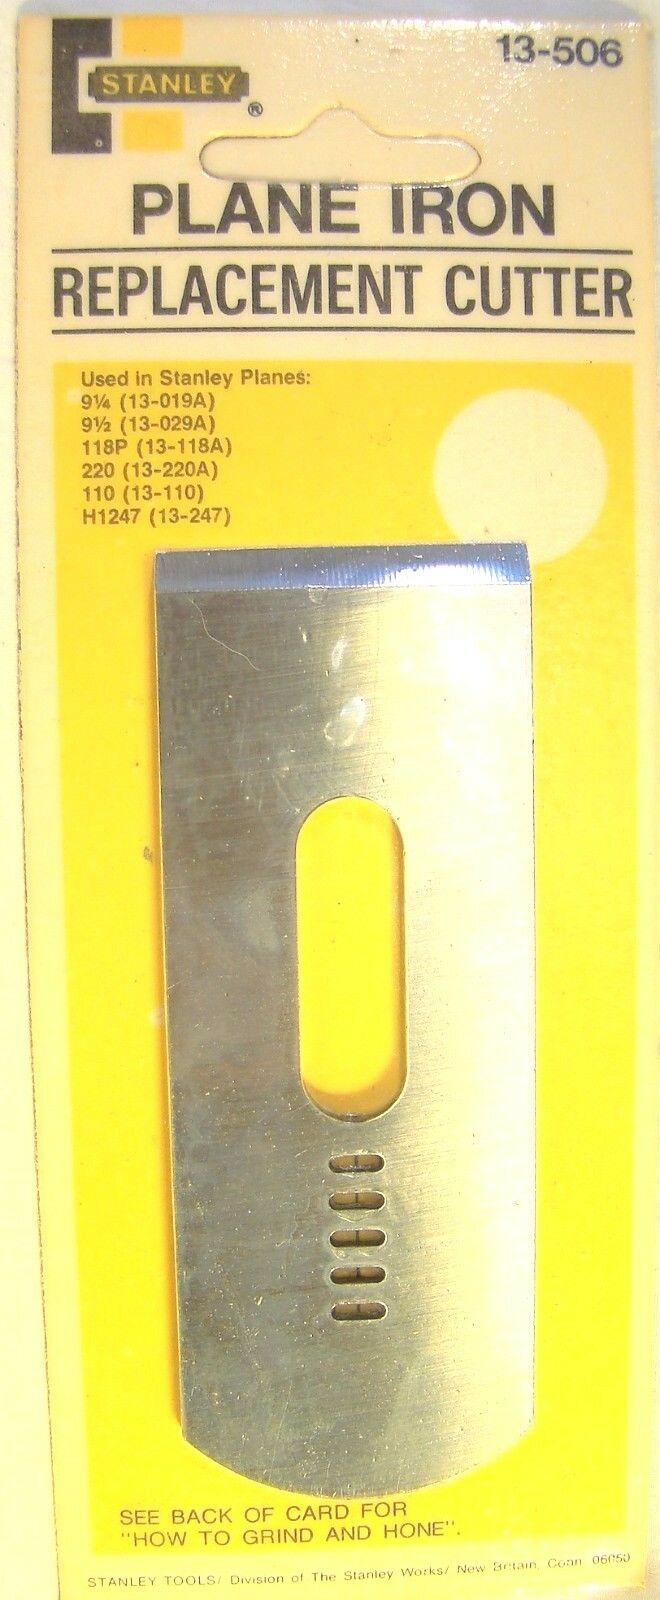 NEW Stanley Plane Iron Replacement Cutter 13-506 1 5/8” NOS